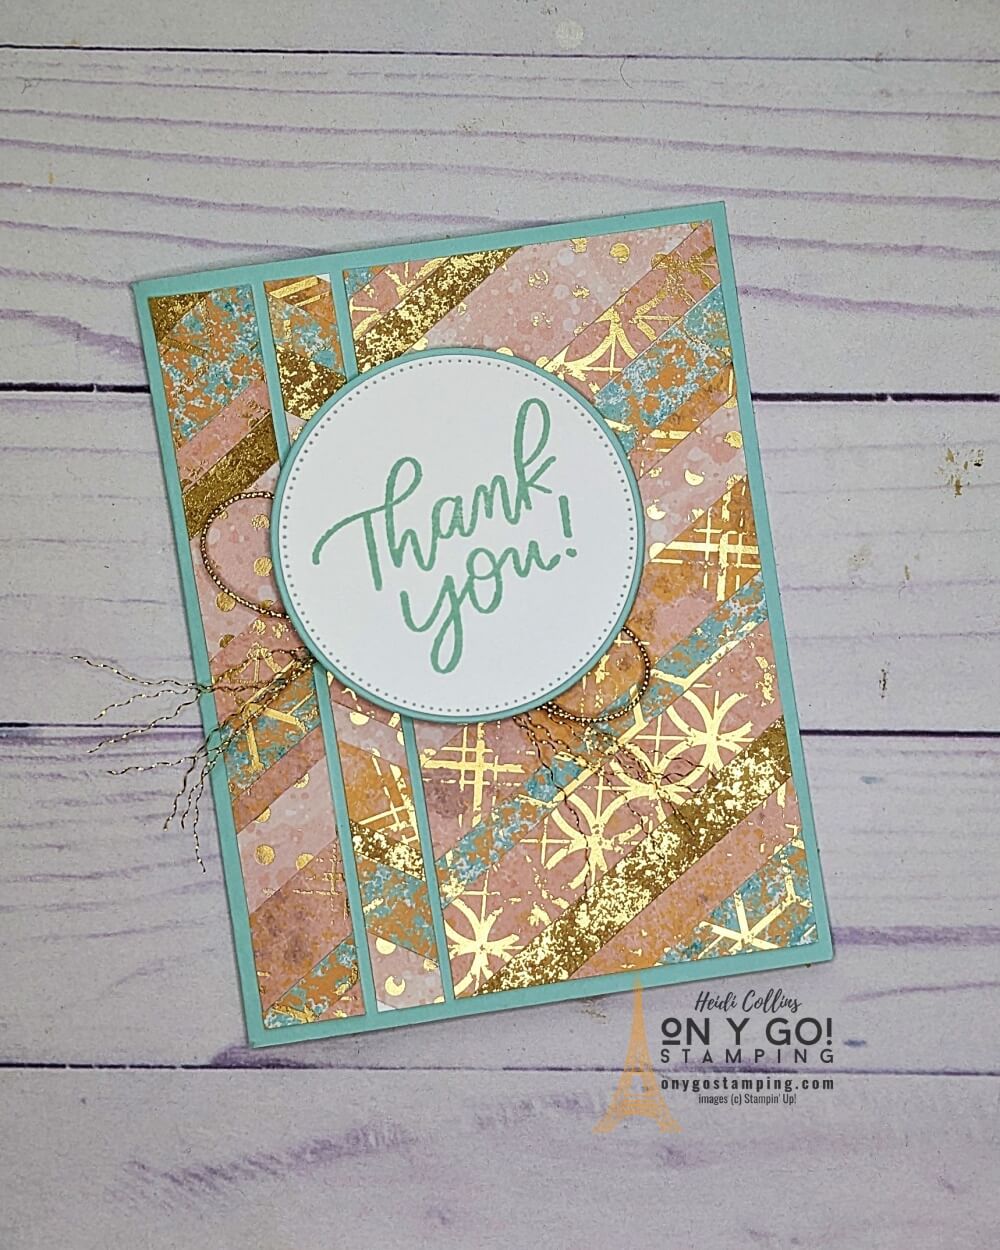 Use up your patterned paper scraps with the strip and flip card making technique like this card using the Texture Chic patterned paper from Stampin' Up!®